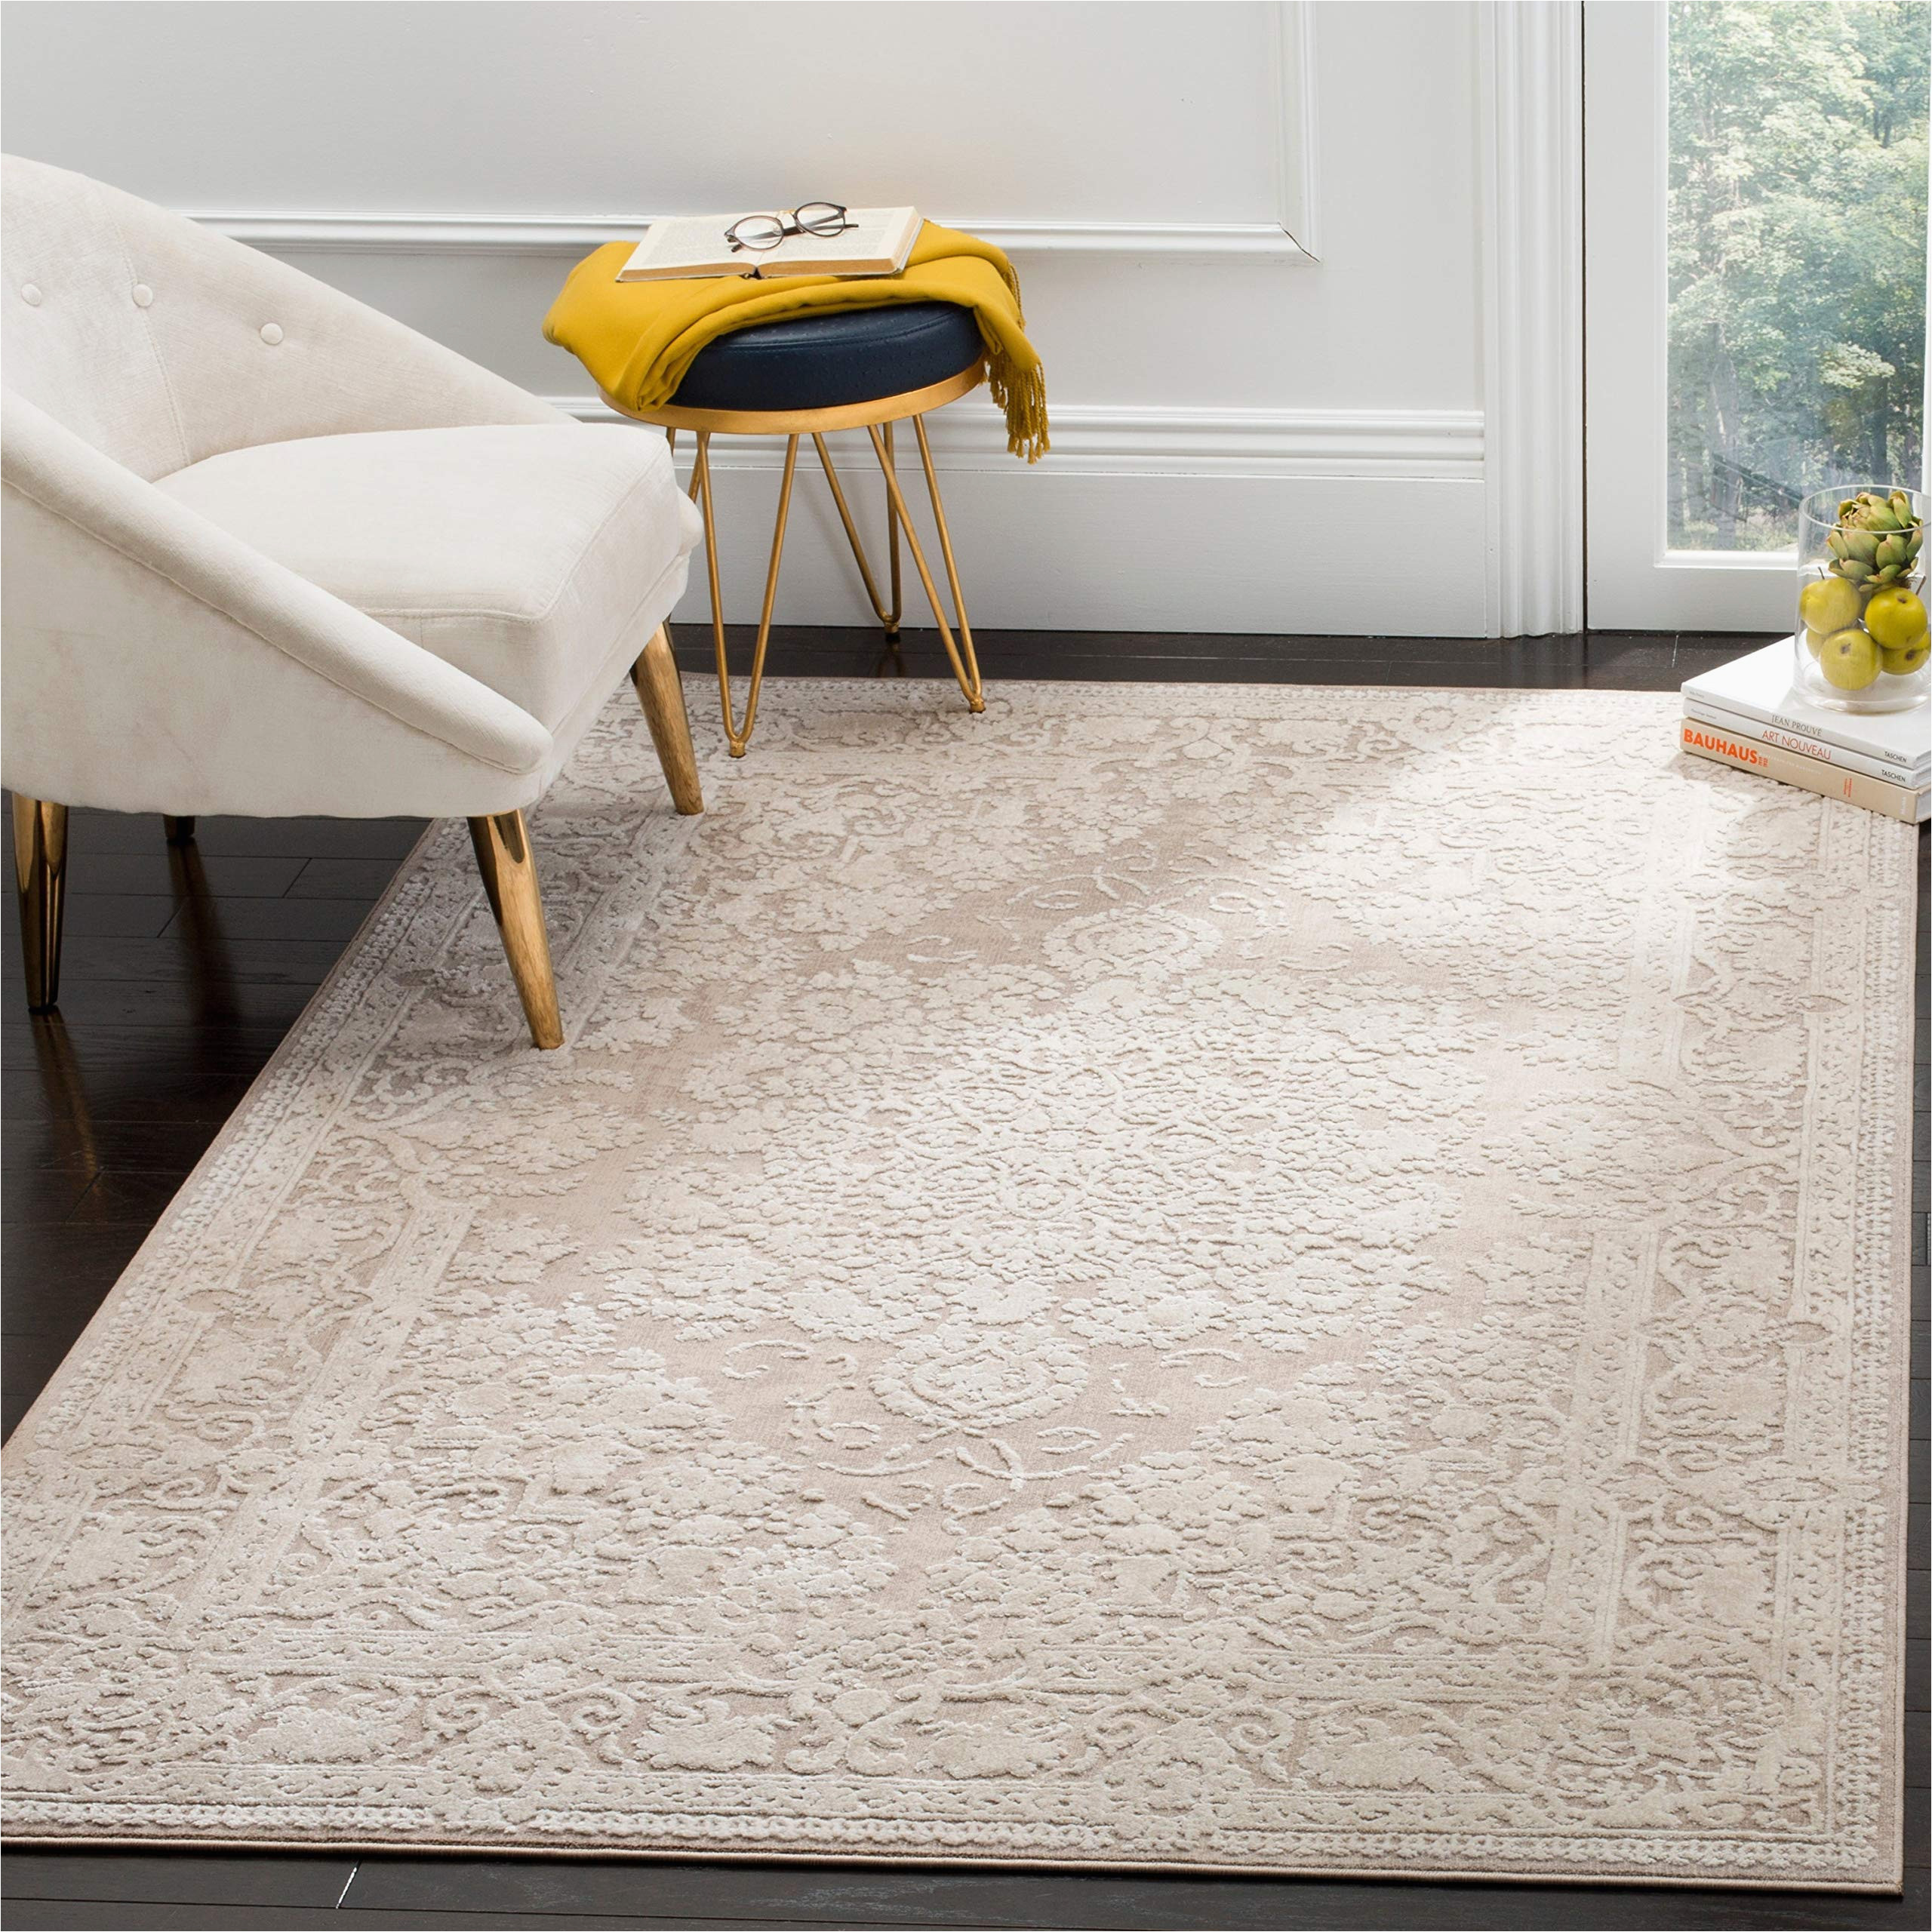 14 X 10 area Rug Safavieh Reflection Collection 10′ X 14′ Beige/cream Rft664a Vintage Distressed area Rug